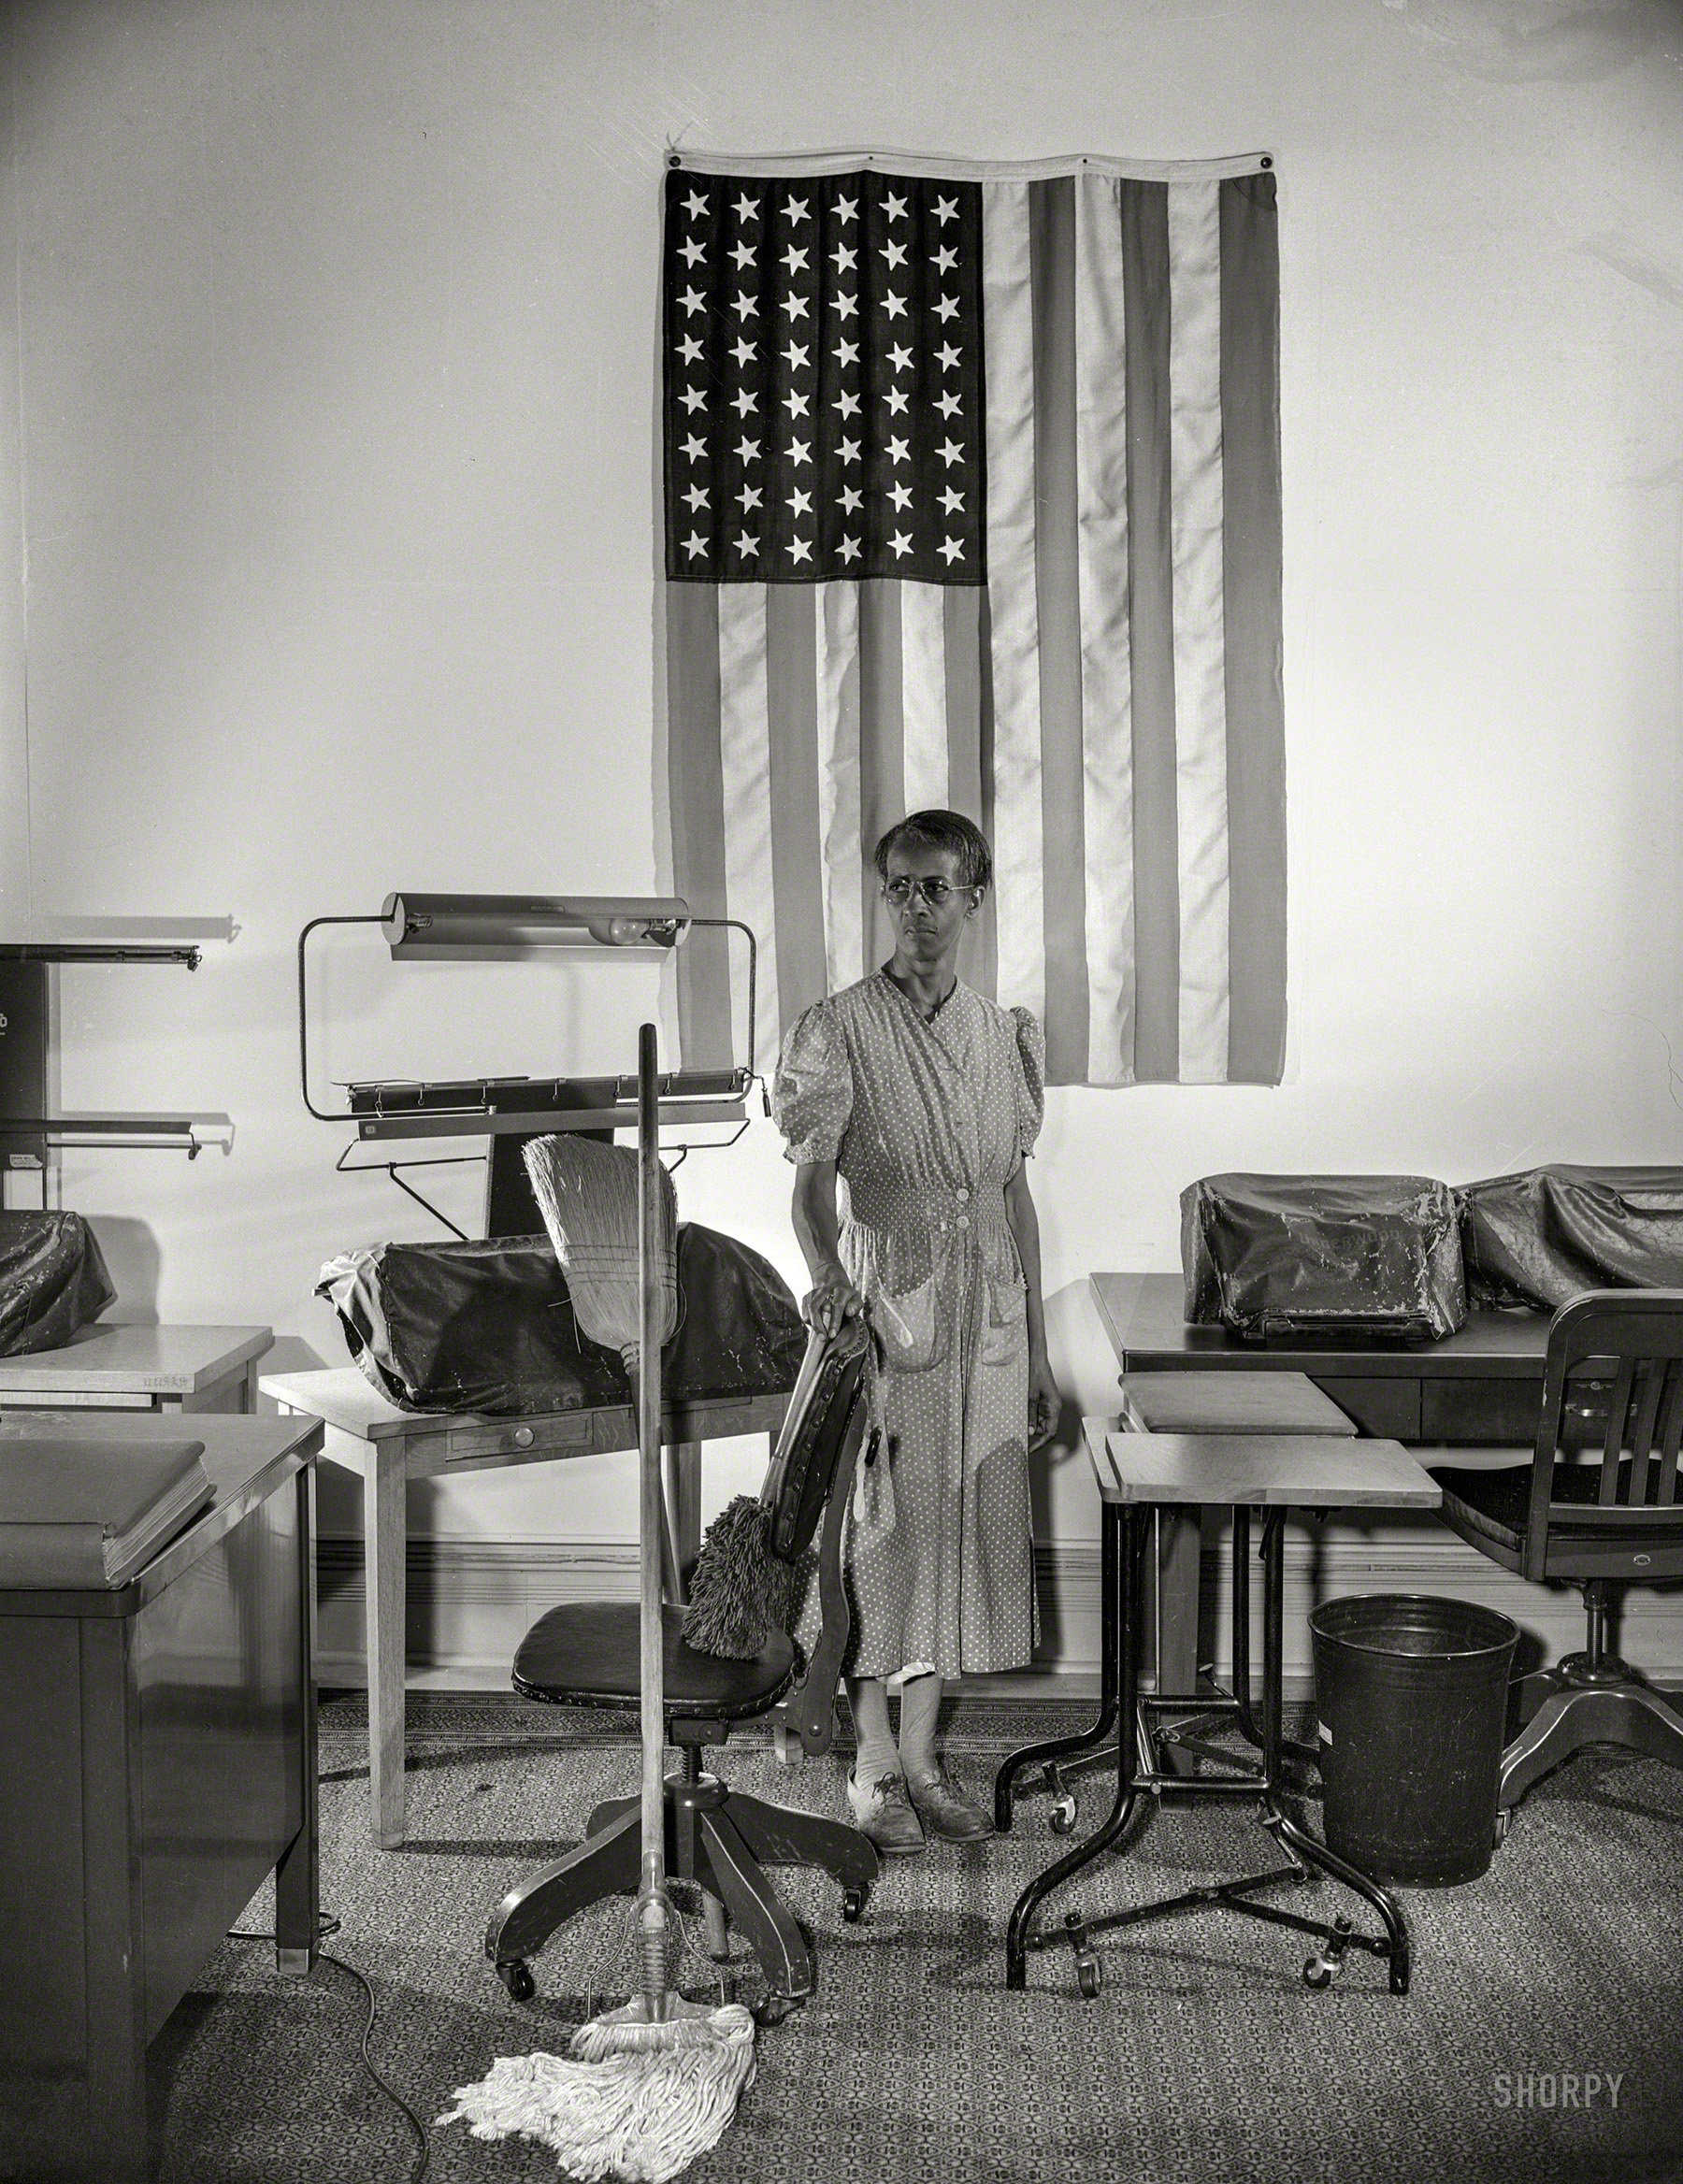 August 1942. "Ella Watson, government charwoman who provides for a family of six on her salary of $1,080 per year. She has been a federal employee for 26 years." Photo by Gordon Parks for the Office of War Information. View full size.